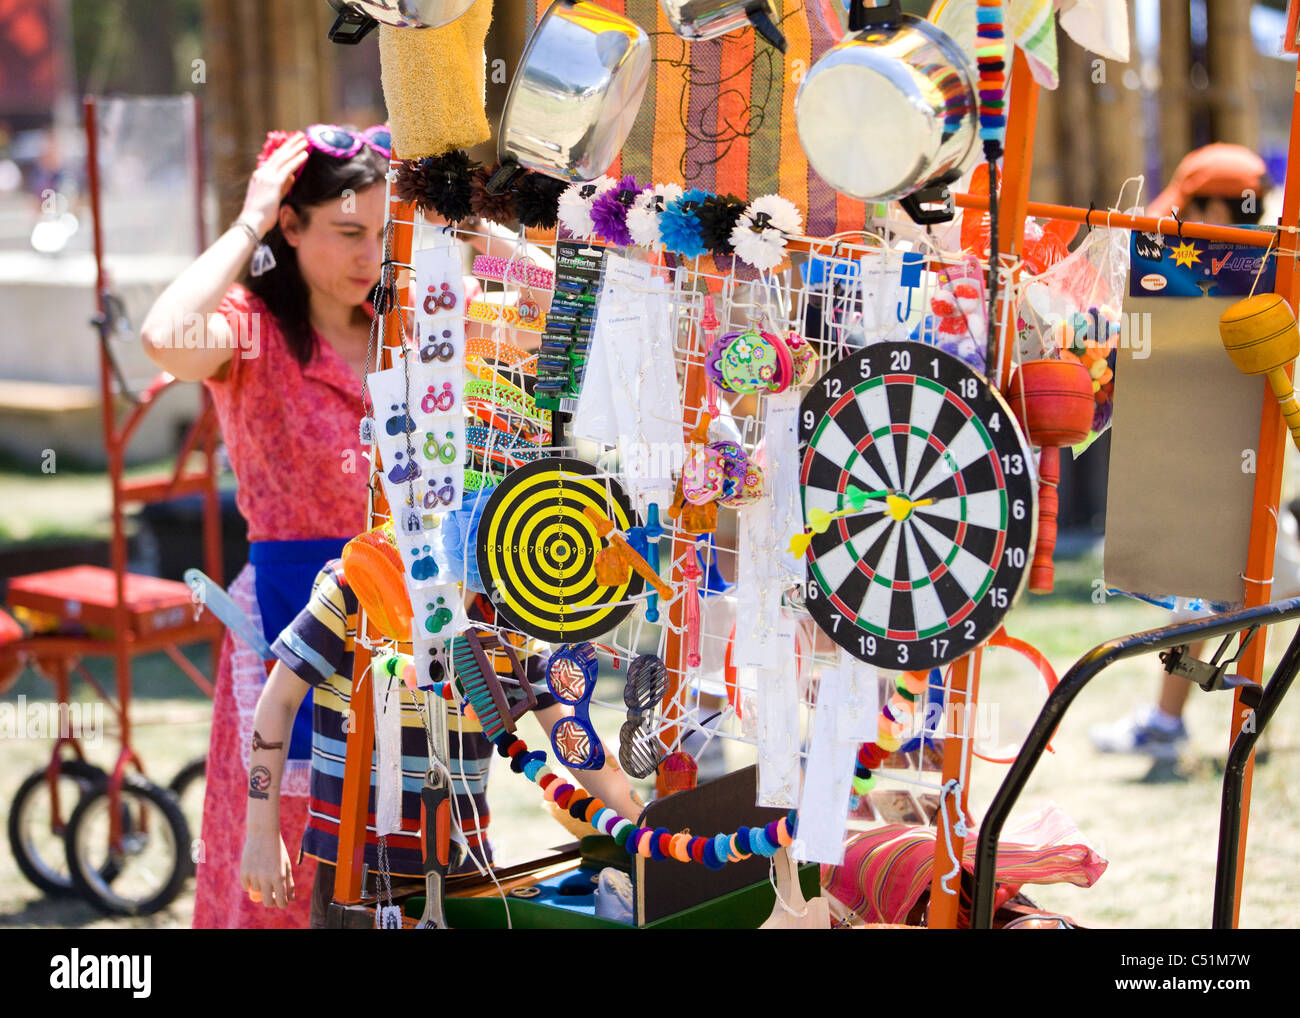 A South American woman selling household goods, accessories, and toys from a cart Stock Photo